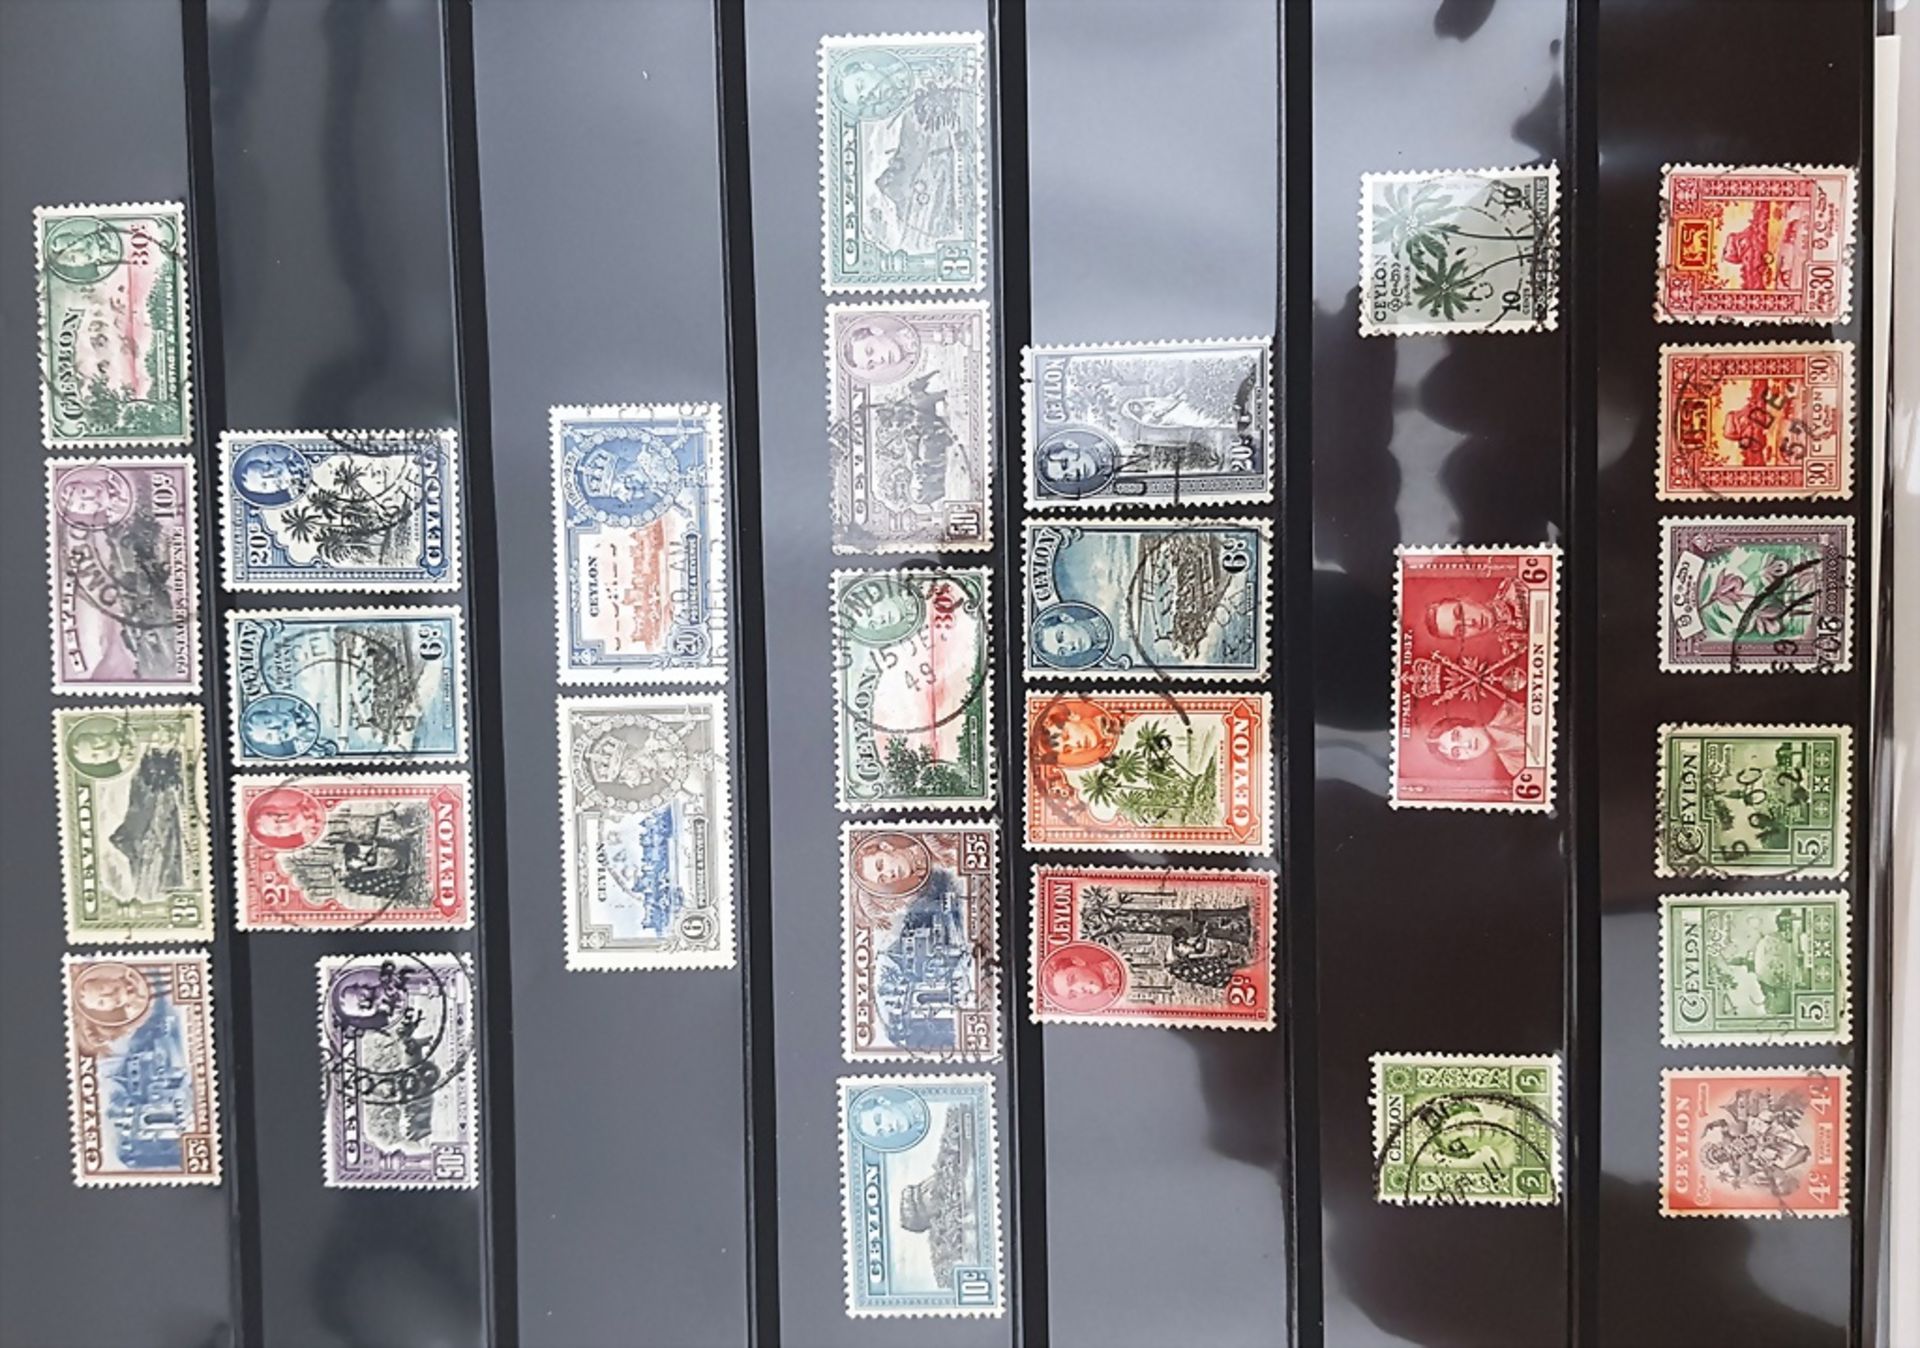 Sammlung Briefmarken diverse Länder / A collection of stamps from various countries - Image 6 of 8